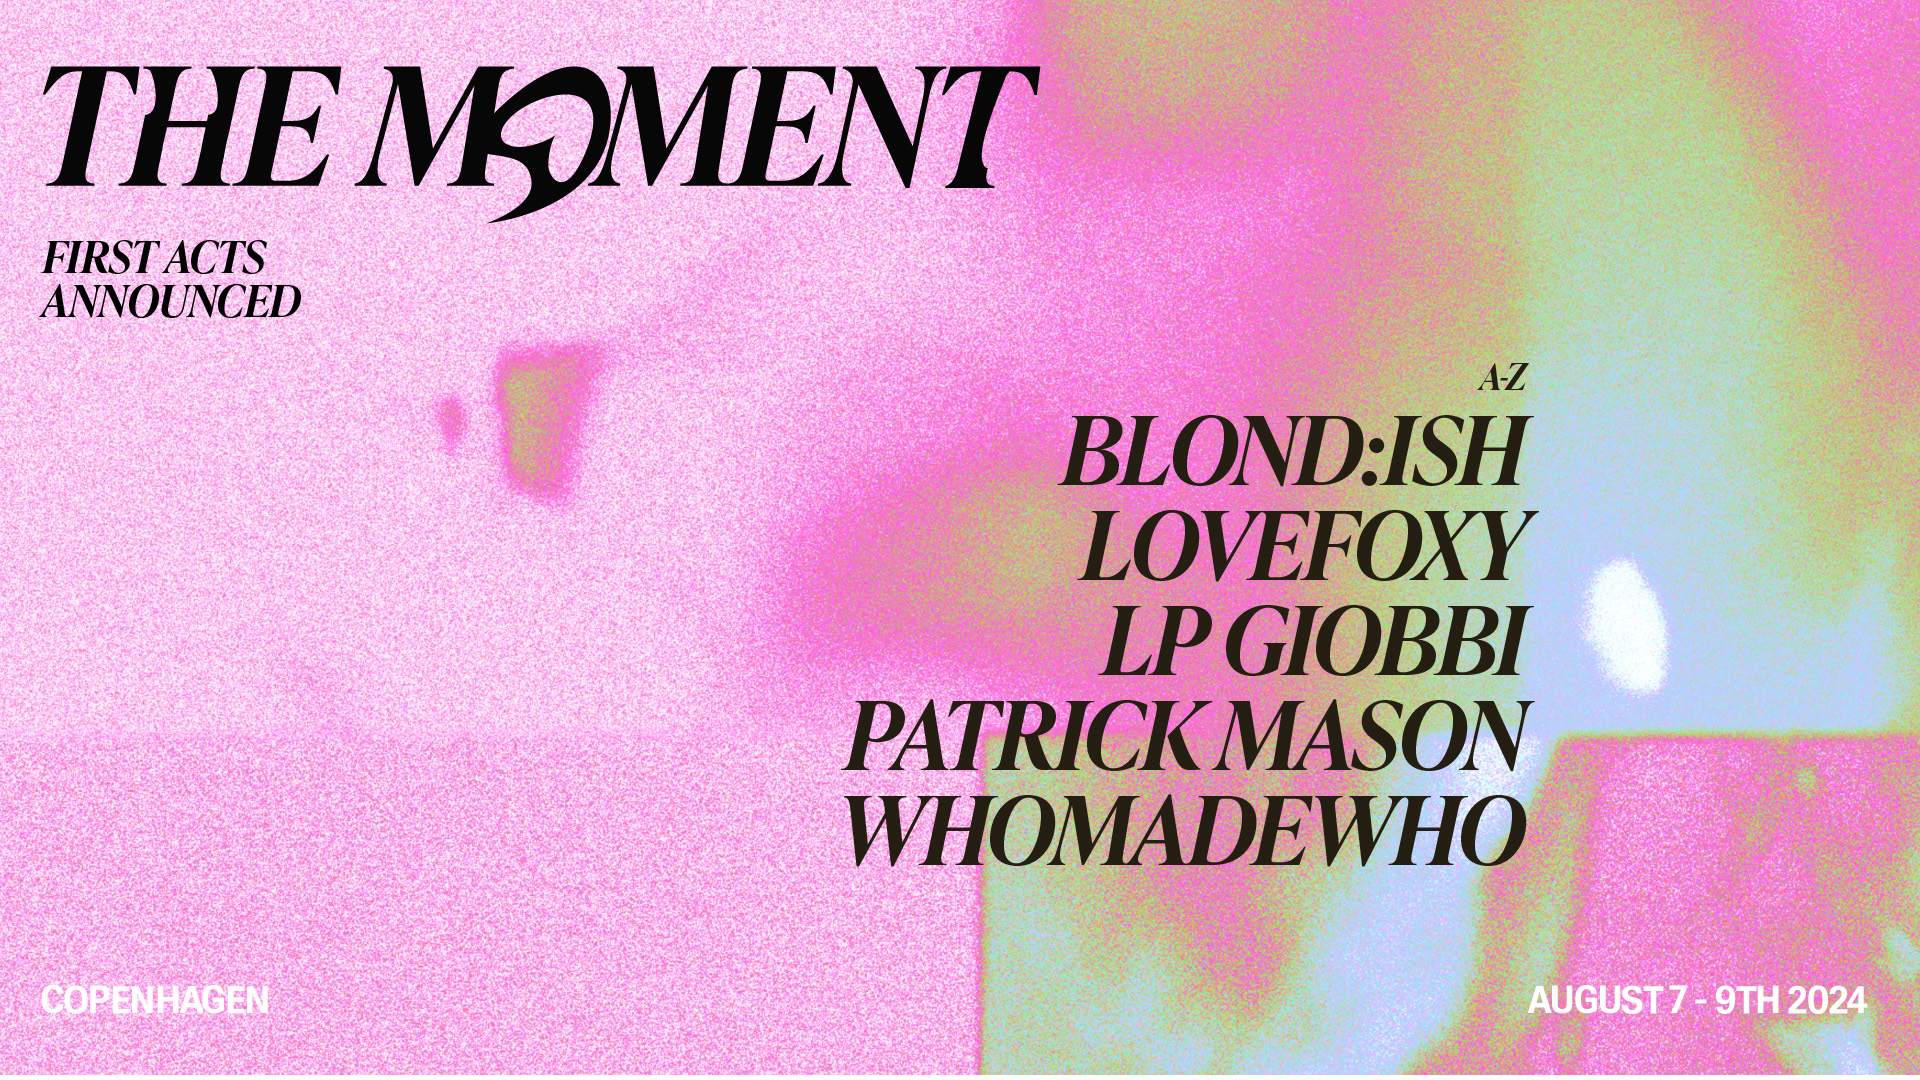 WhoMadeWho presents: THE MOMENT 7- 9TH OF AUGUST 2024 - フライヤー表